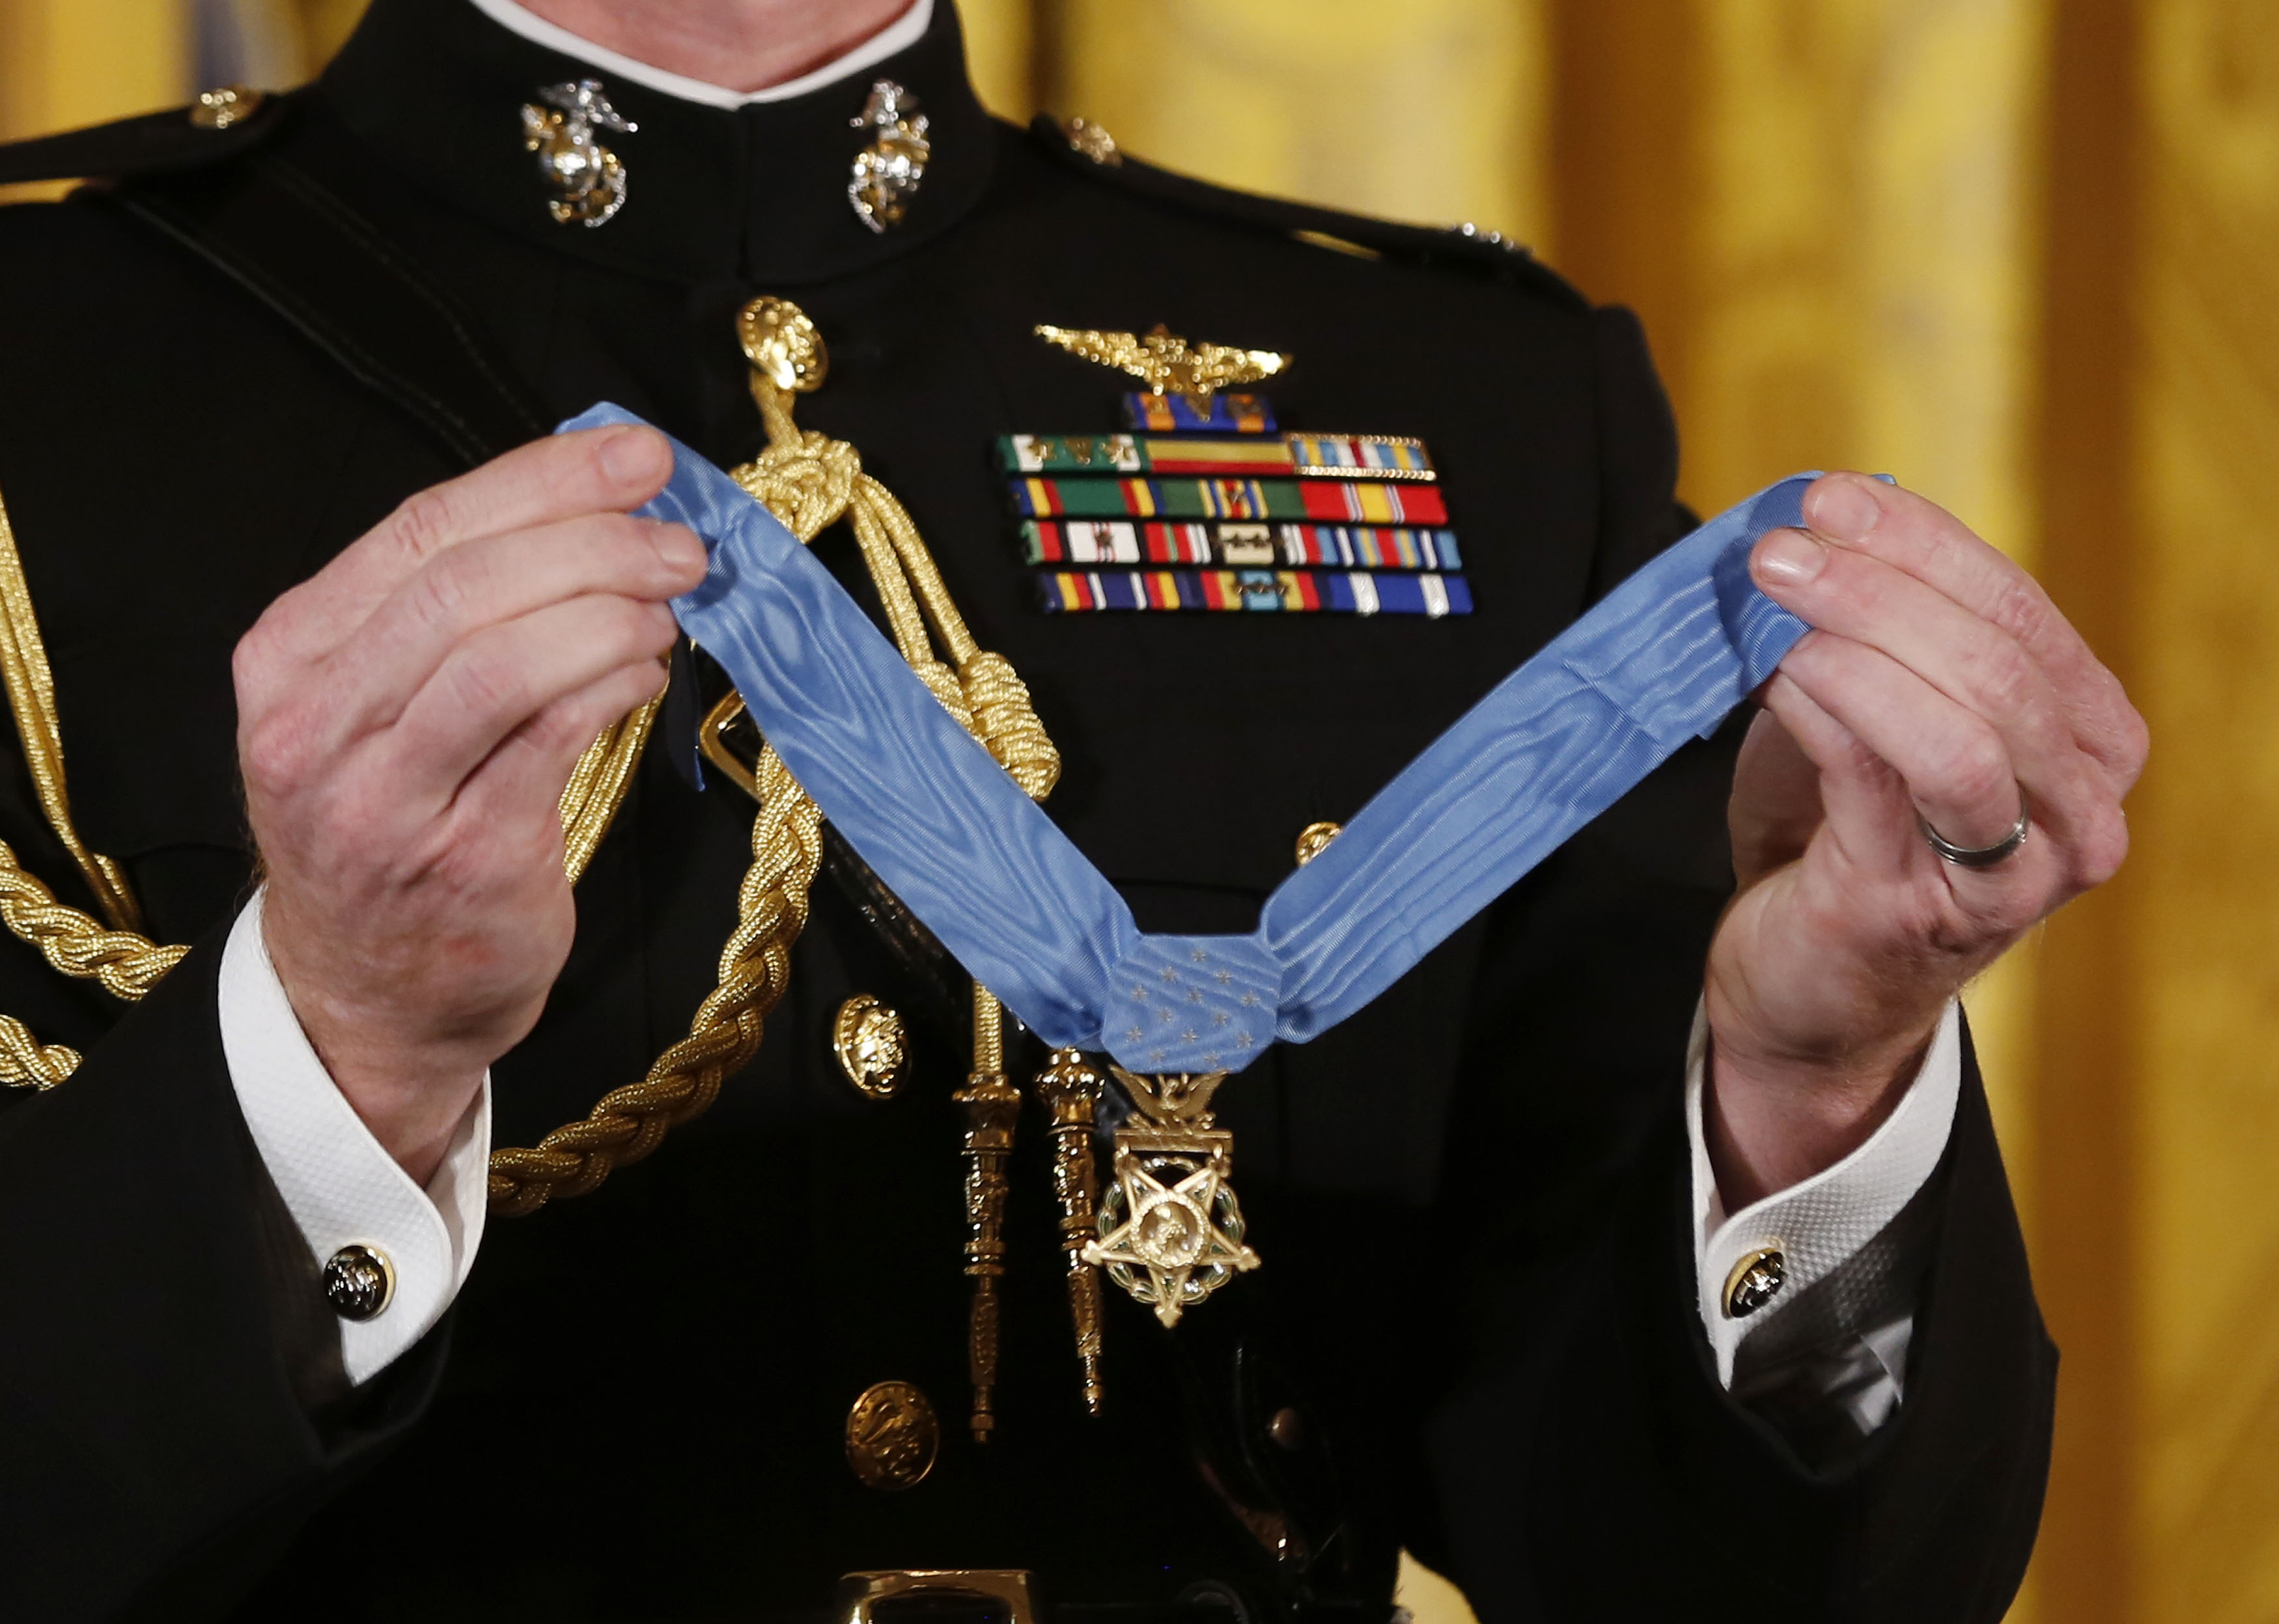 Meyer holds the Medal of Honor before U.S. President Obama presents it to Army Specialist Four Santiago Erevia, one of 24 U.S. Army veterans awarded the medal in Washington